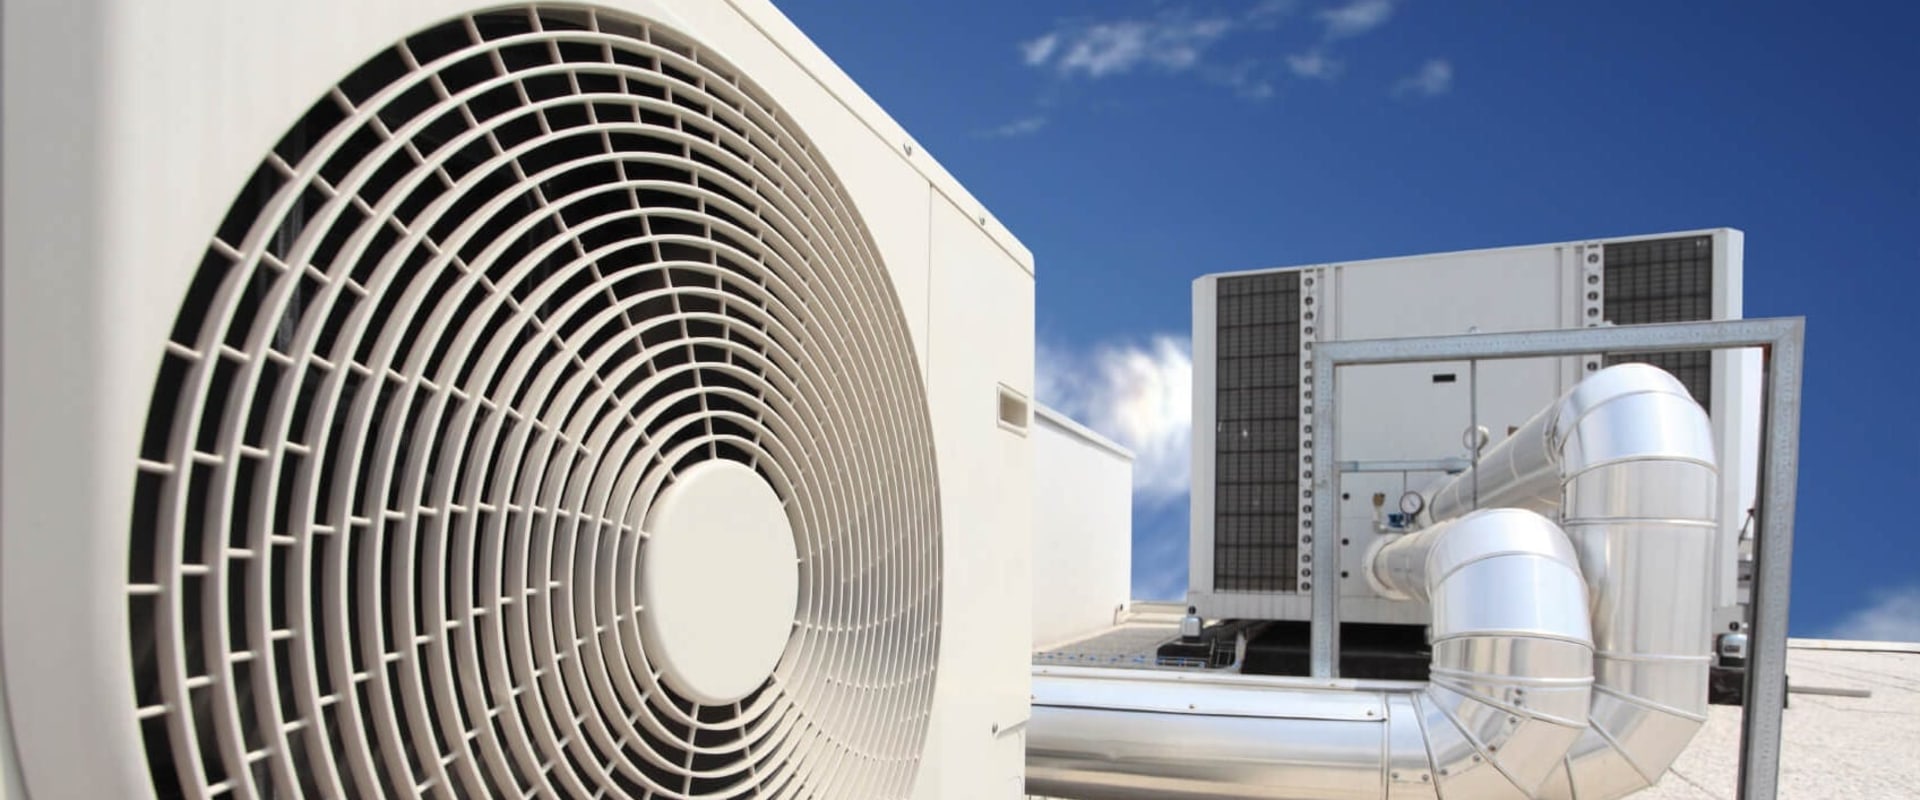 Save Money on Energy Bills with Properly Maintained HVAC System in West Palm Beach, FL